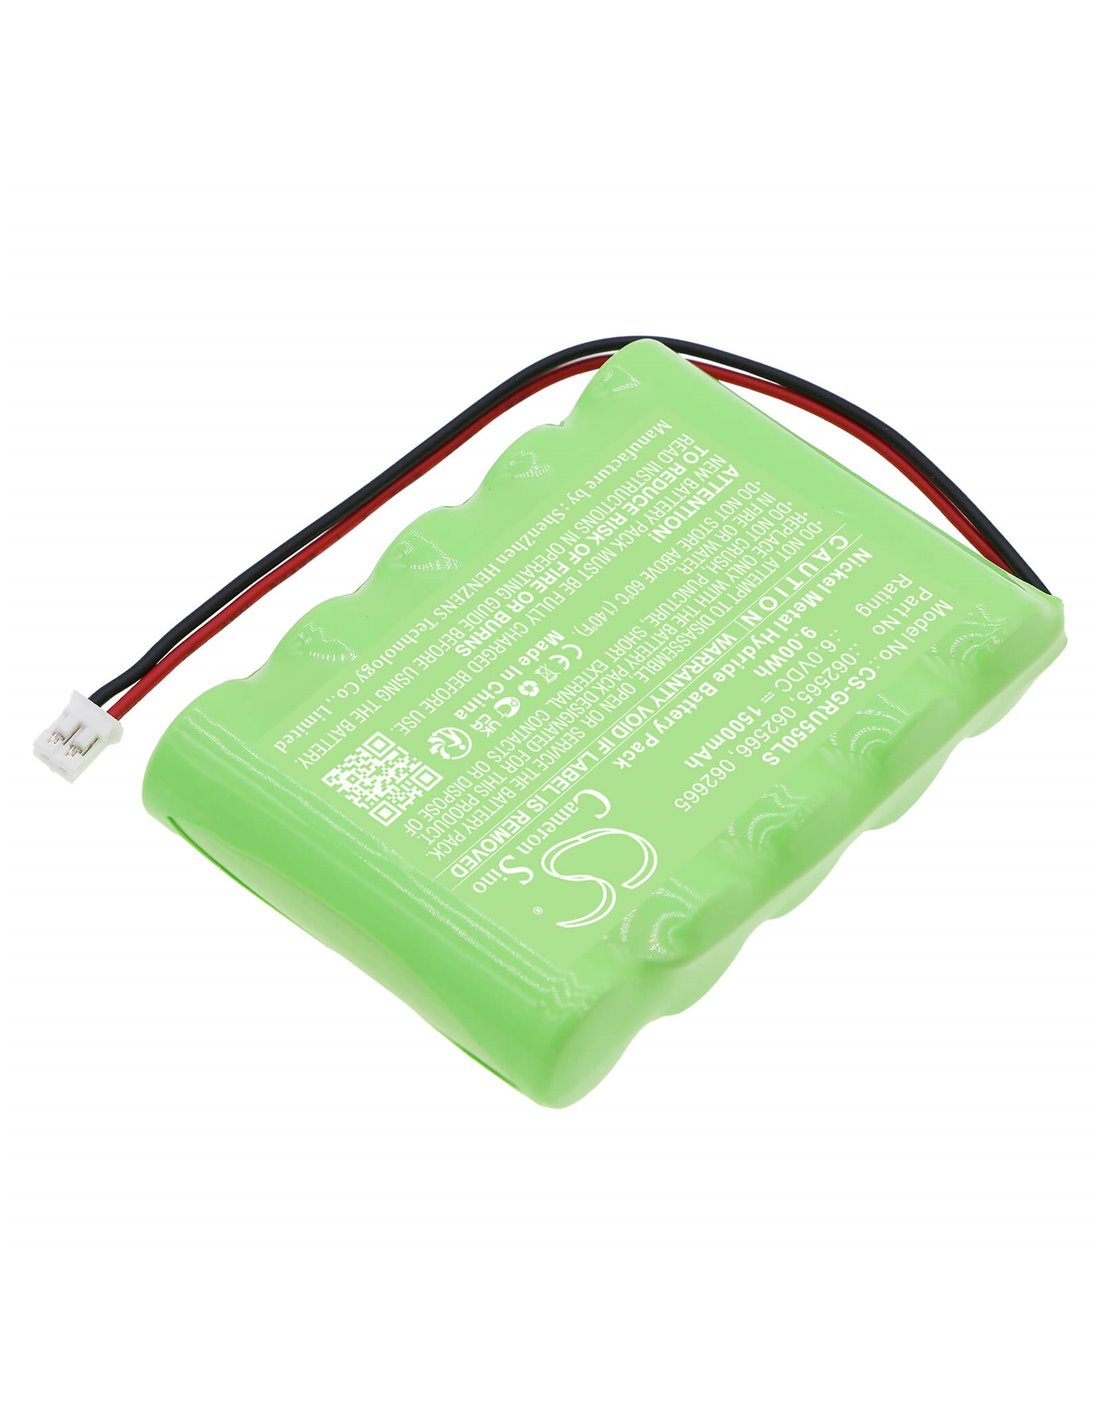 6.0V, Ni-MH, 1500mAh, Battery fits Legrand, Baes Addressable, Sati Connected, 9.00Wh